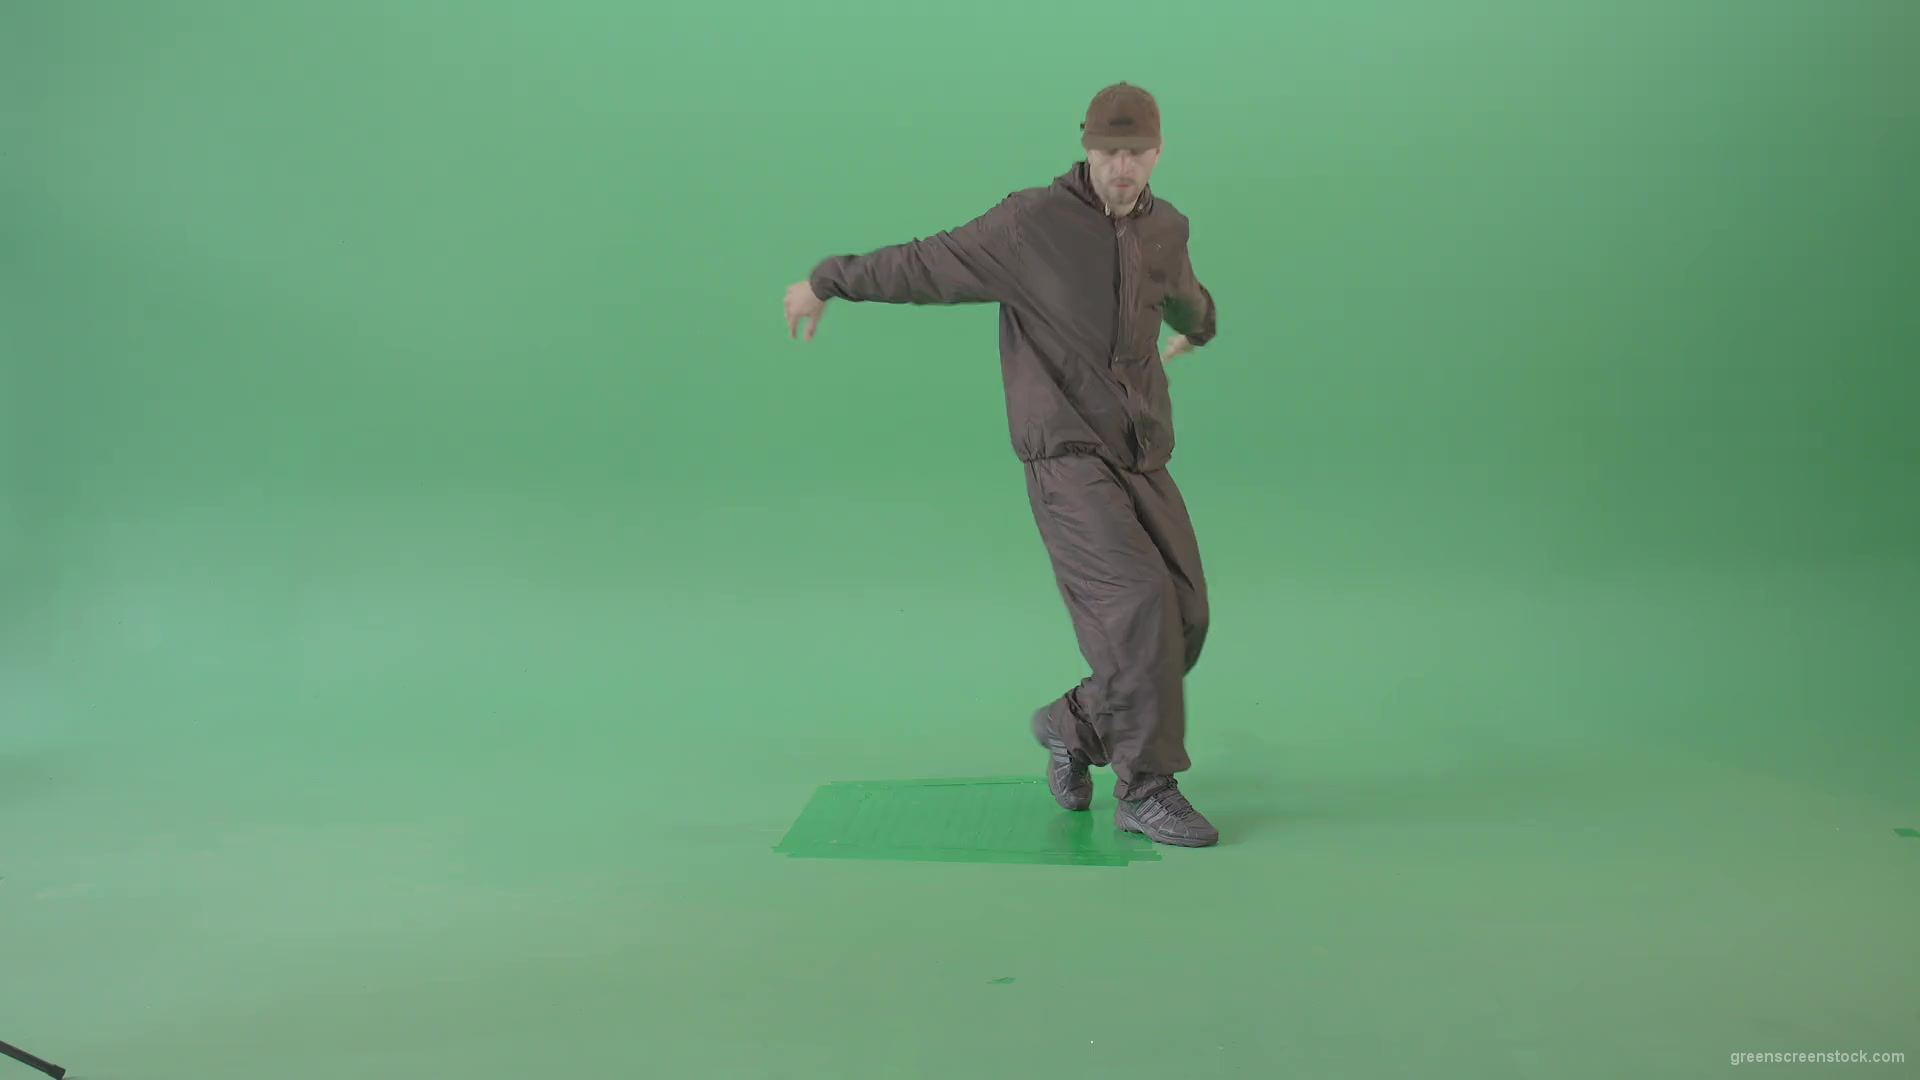 B-Boy-breakdance-man-making-power-moves-isolated-on-green-screen-4K-Video-Footage-1920_001 Green Screen Stock